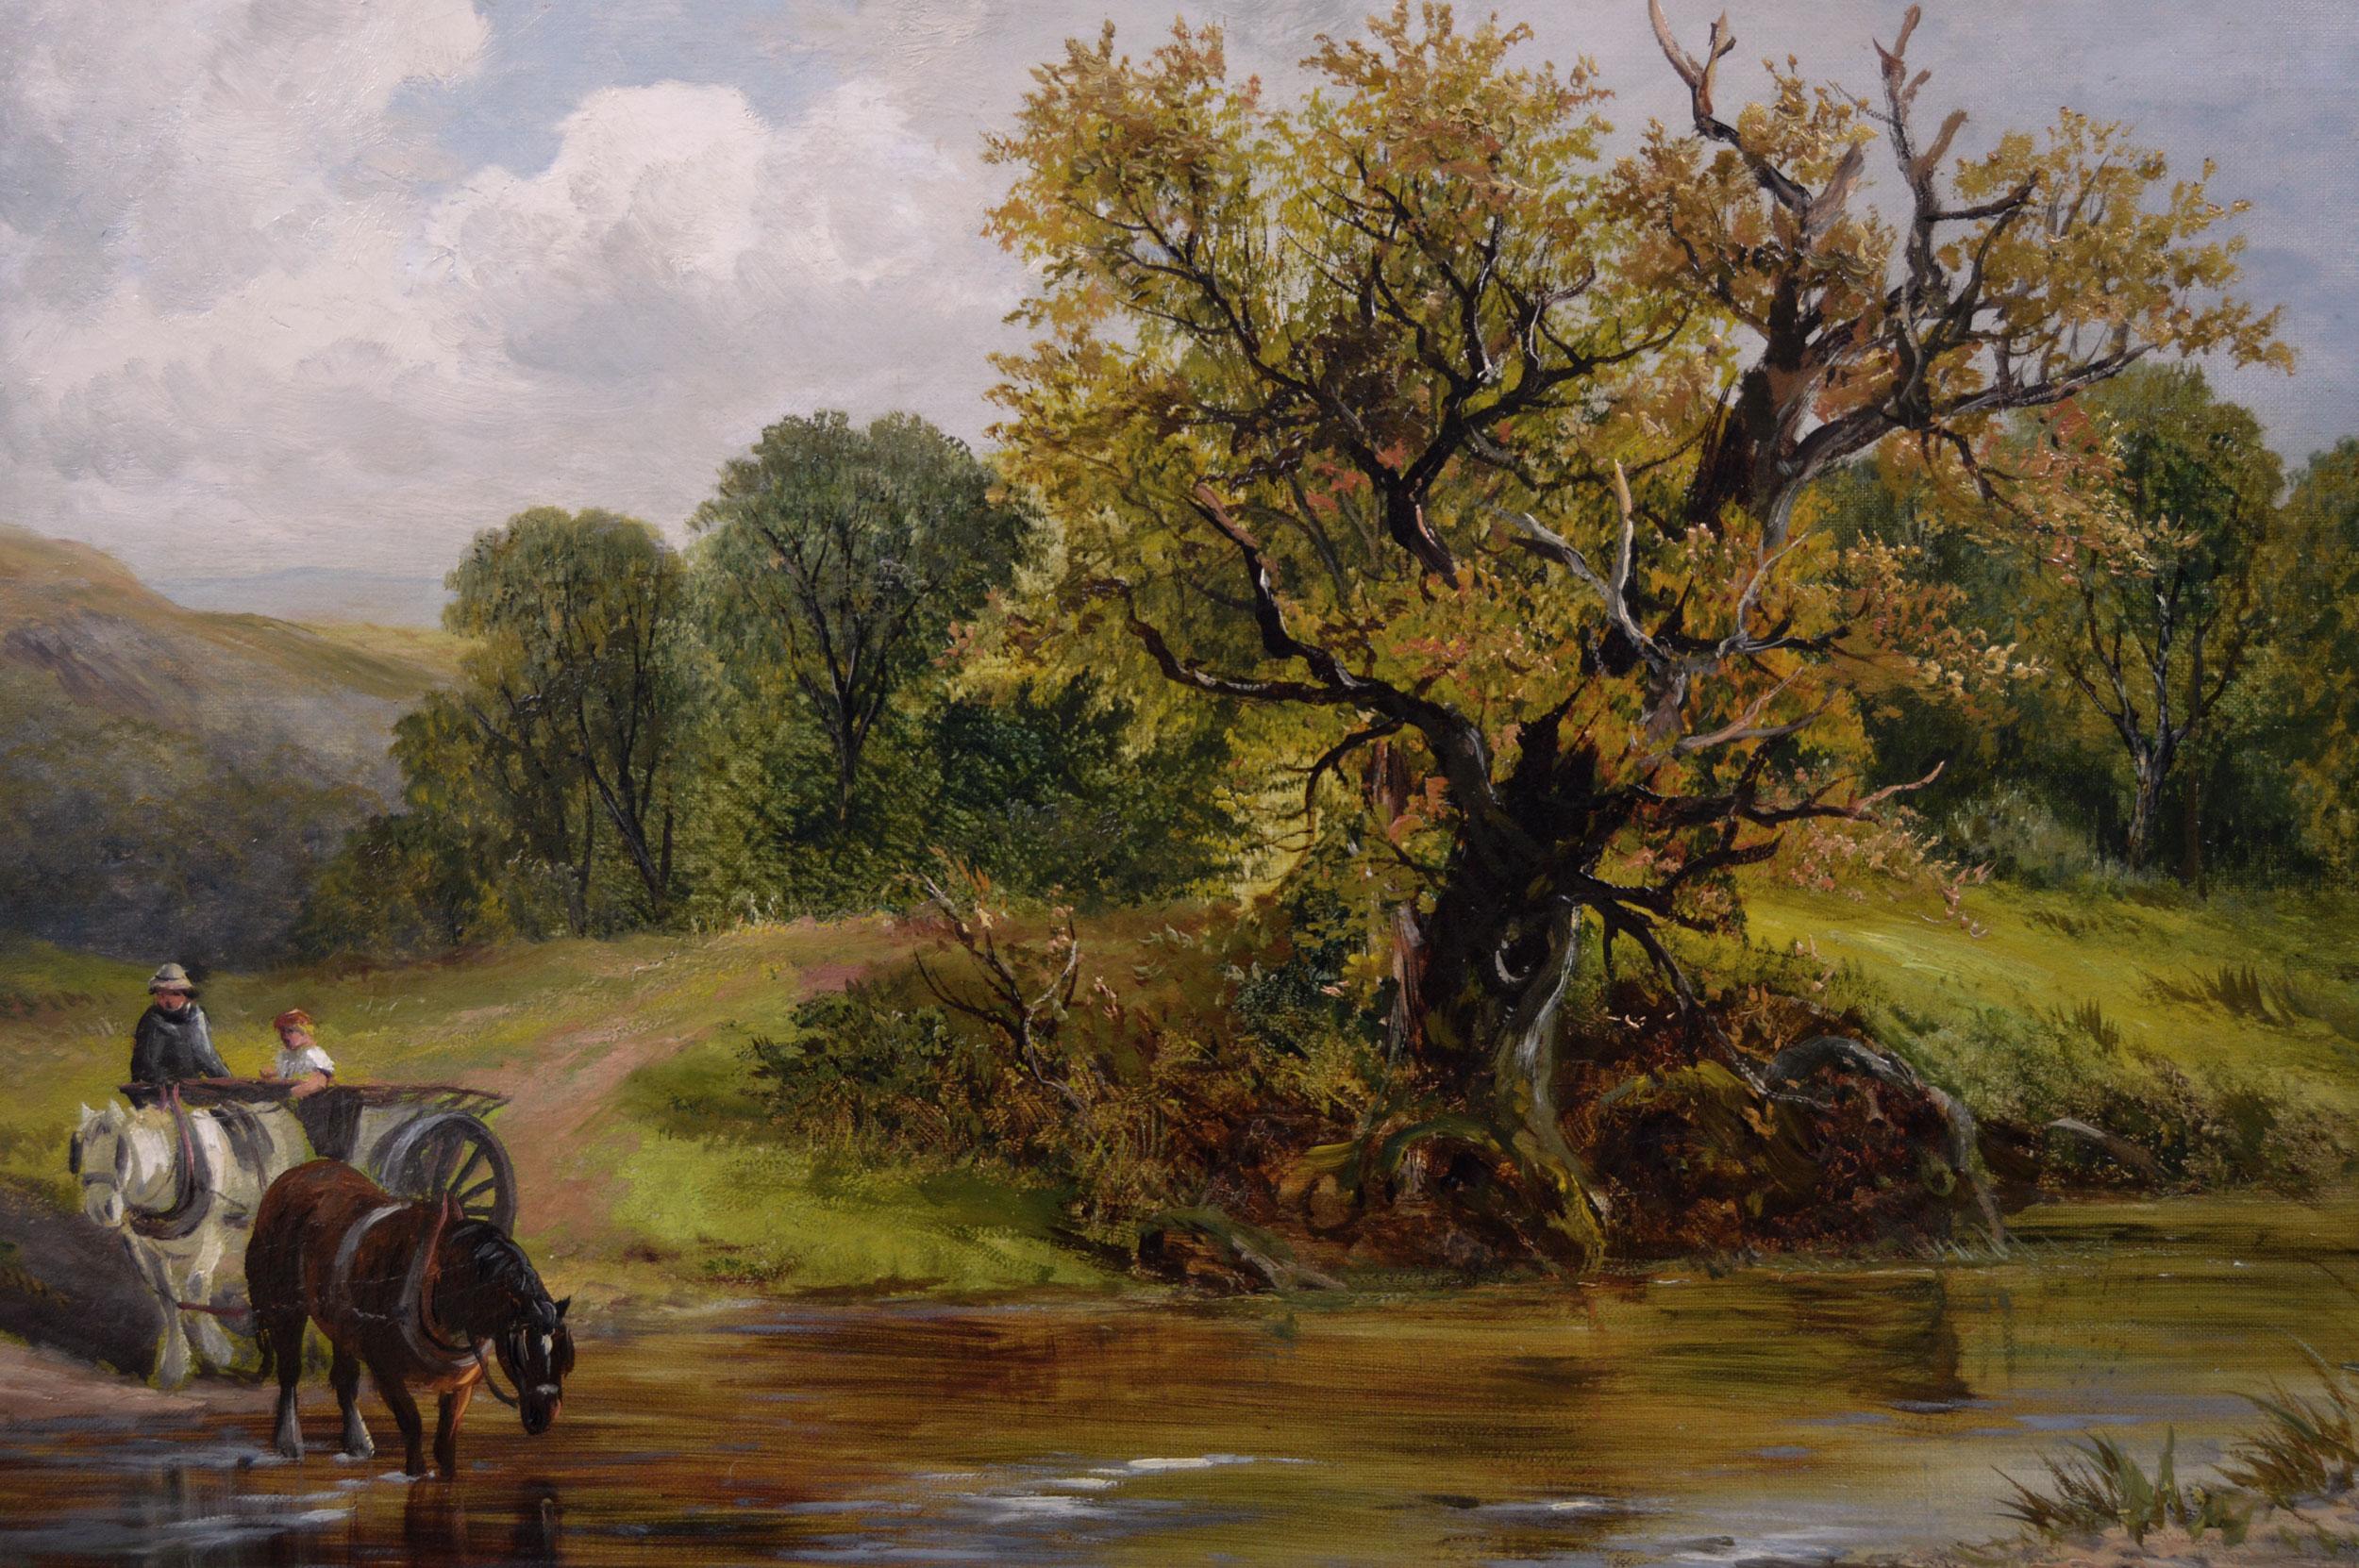 George Turner 
British, (1843-1910)
Crossing the Ford
Oil on canvas, signed, further signed & inscribed verso
Image size: 15.5 inches x 25.5 inches 
Size including frame: 21.5 inches x 31.25 inches

A wonderful landscape painting of figures in a